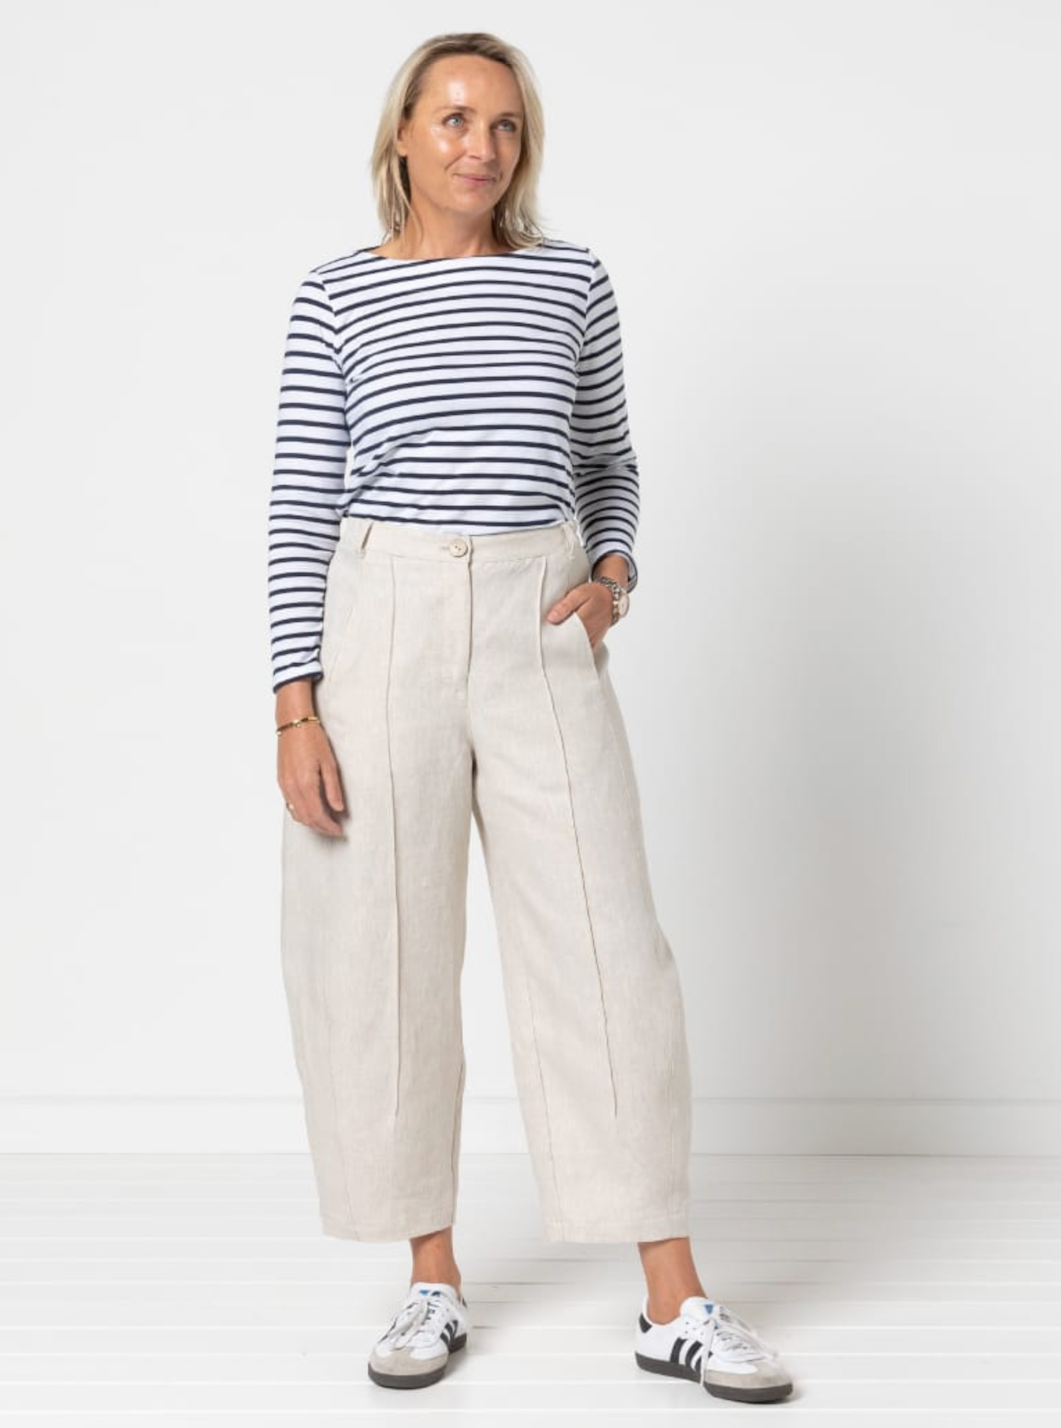 Woman wearing the Twig Woven Pant sewing pattern from Style Arc on The Fold Line. A pants or jeans pattern made in denim, drill, cotton, or linen fabric, featuring a fly front, in-seam pockets, elastic back waistband, front and back leg pintucks, and a cr